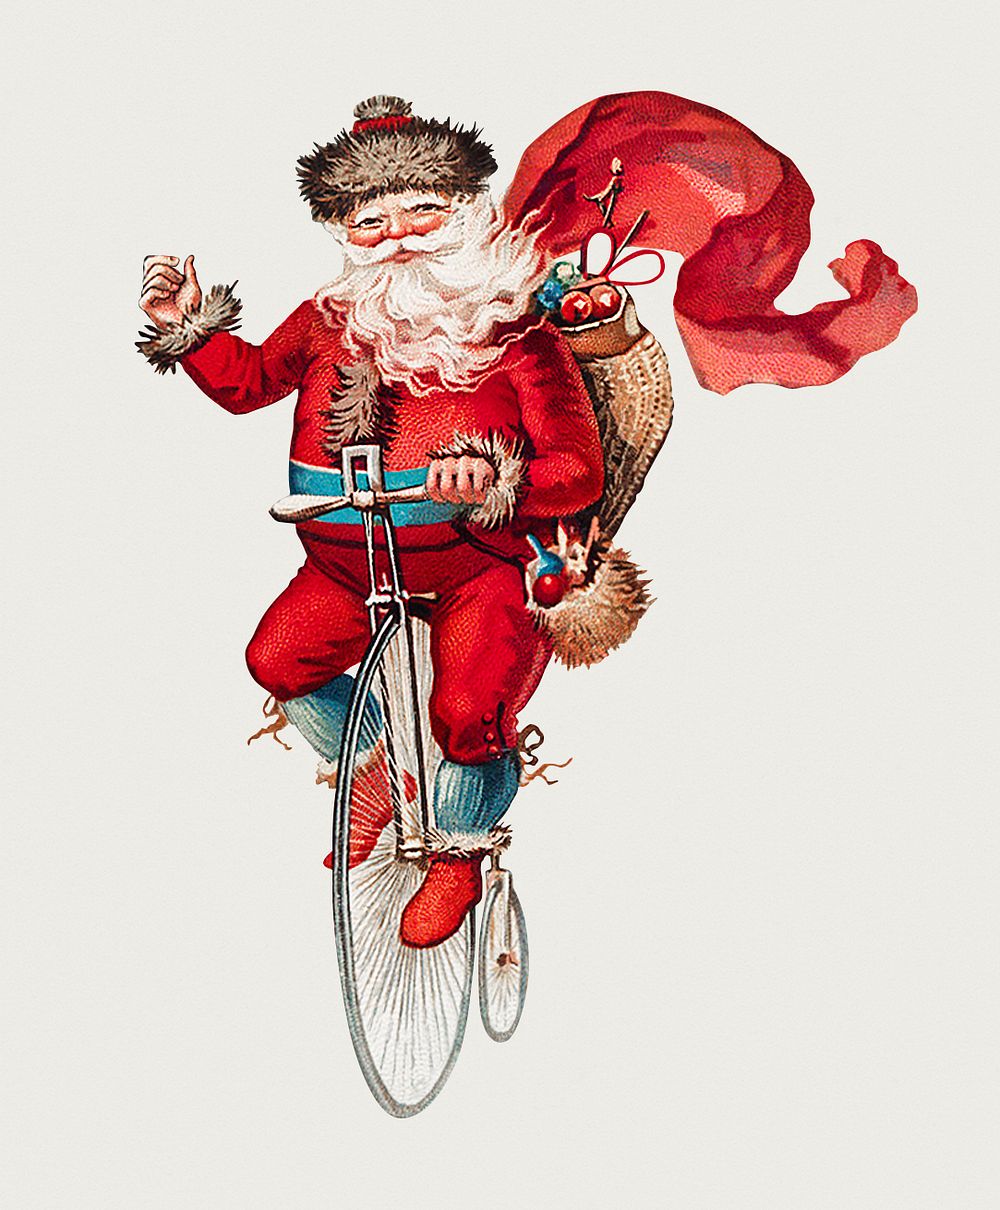 Santa Claus on a penny-farthing sticker illustration